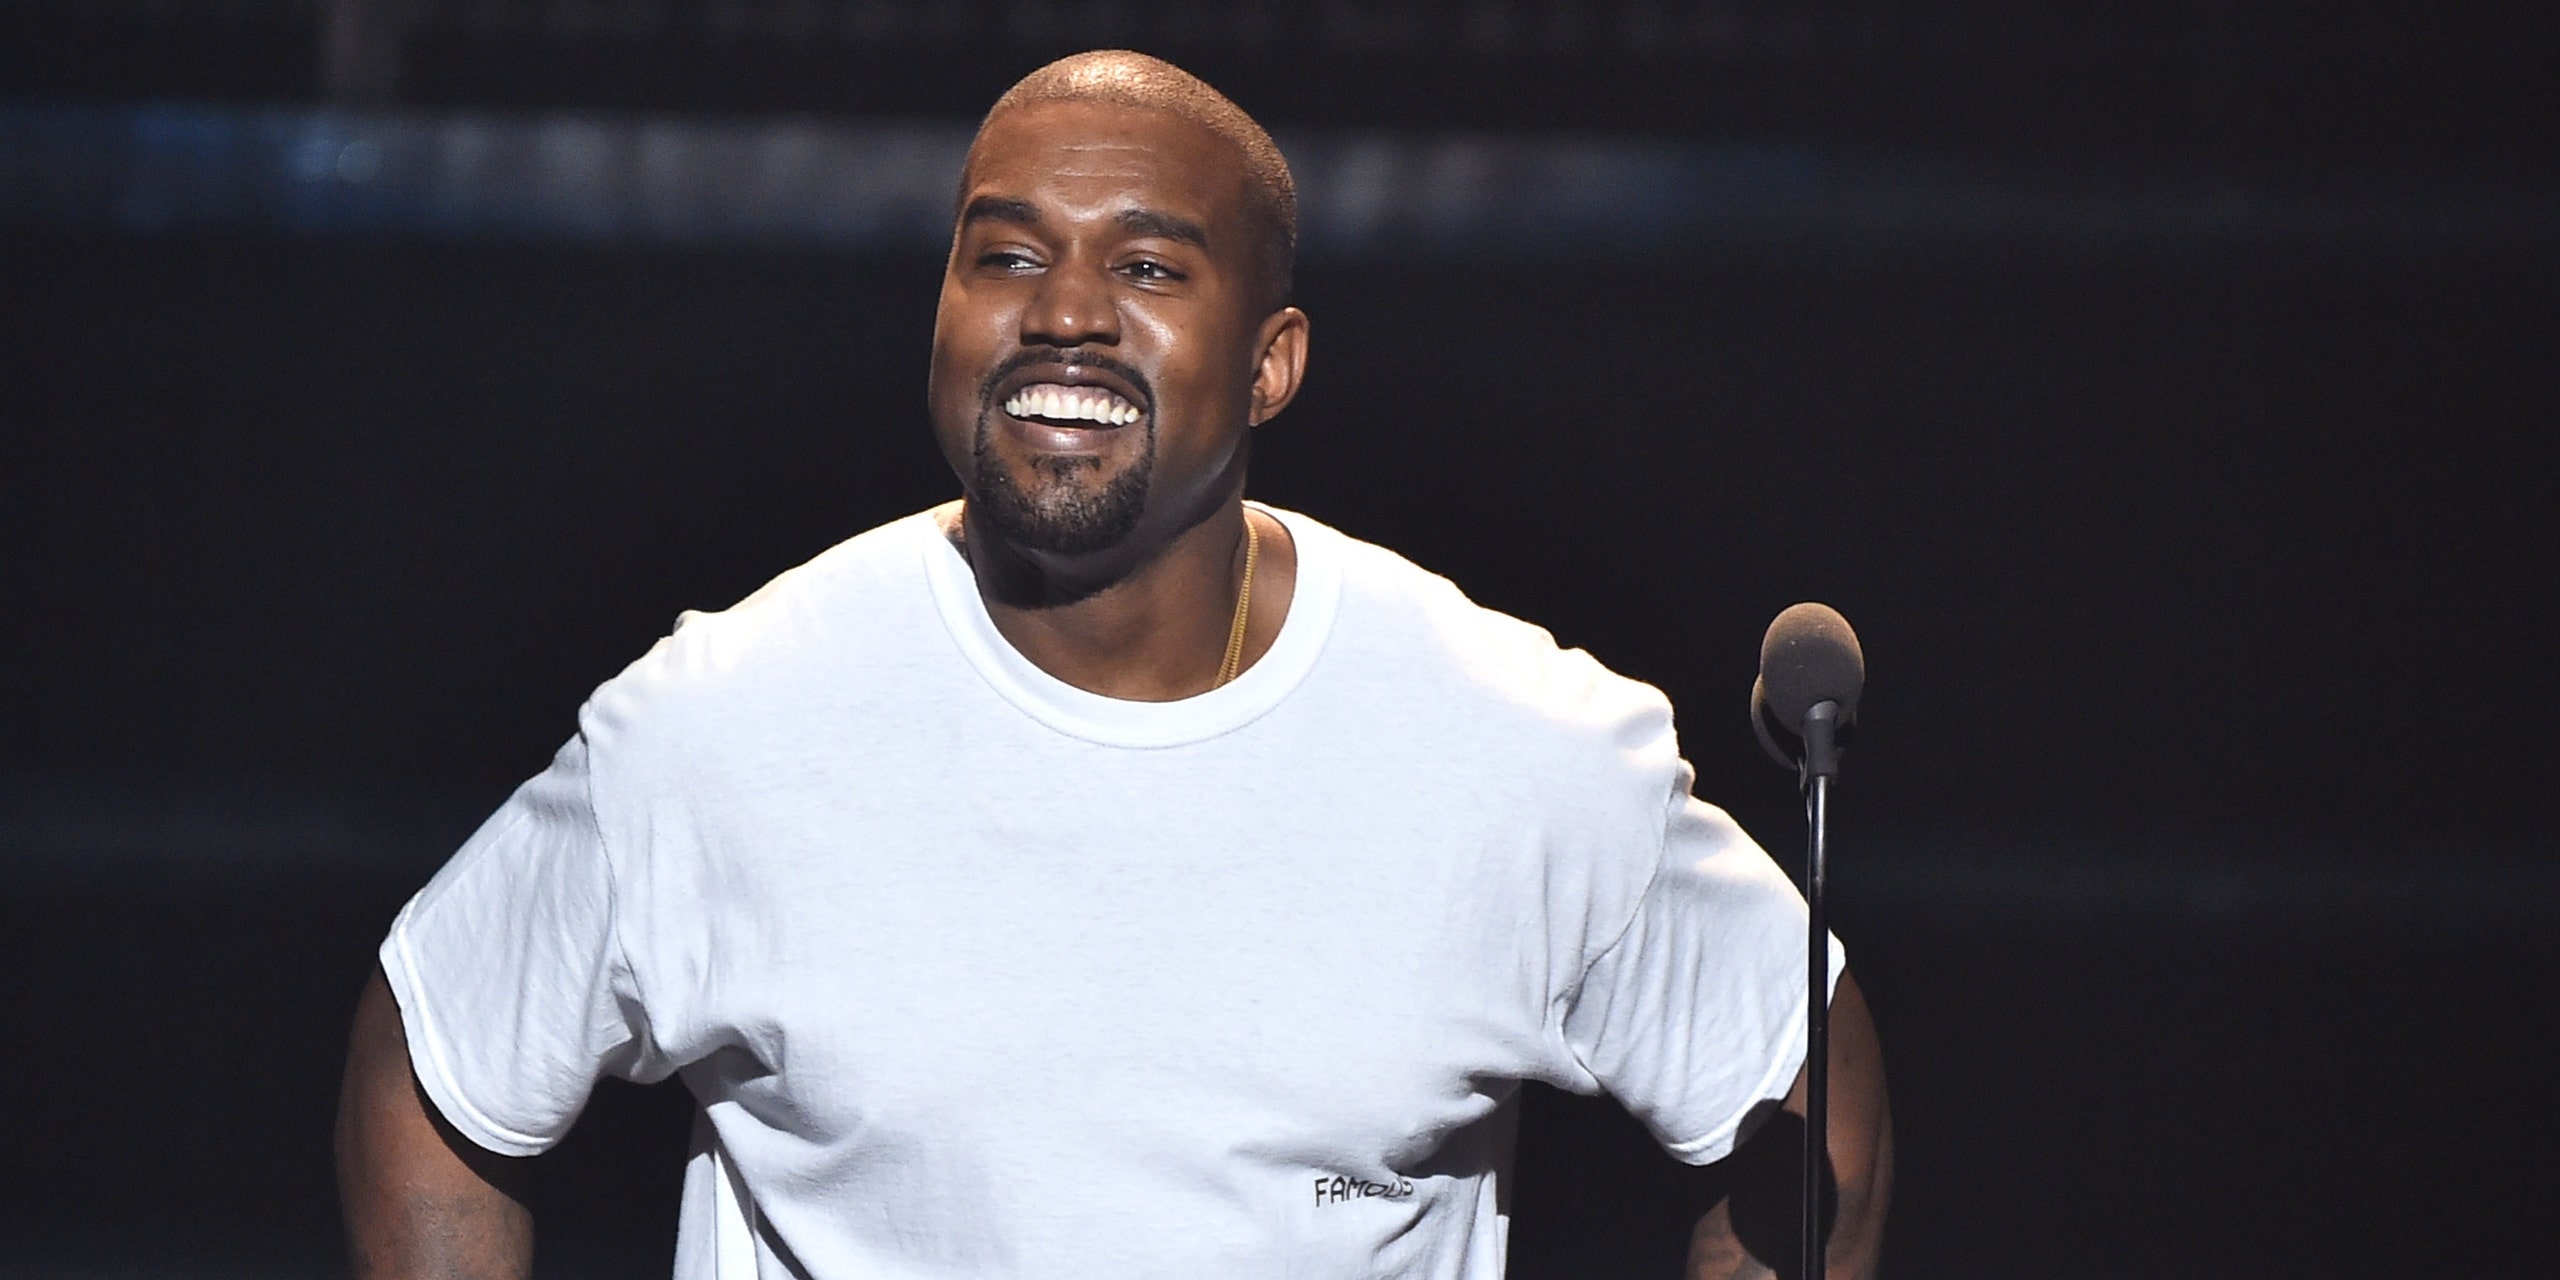 Is Kanye West Dropping New Album & Documentary This Week? All The Clues And Theories